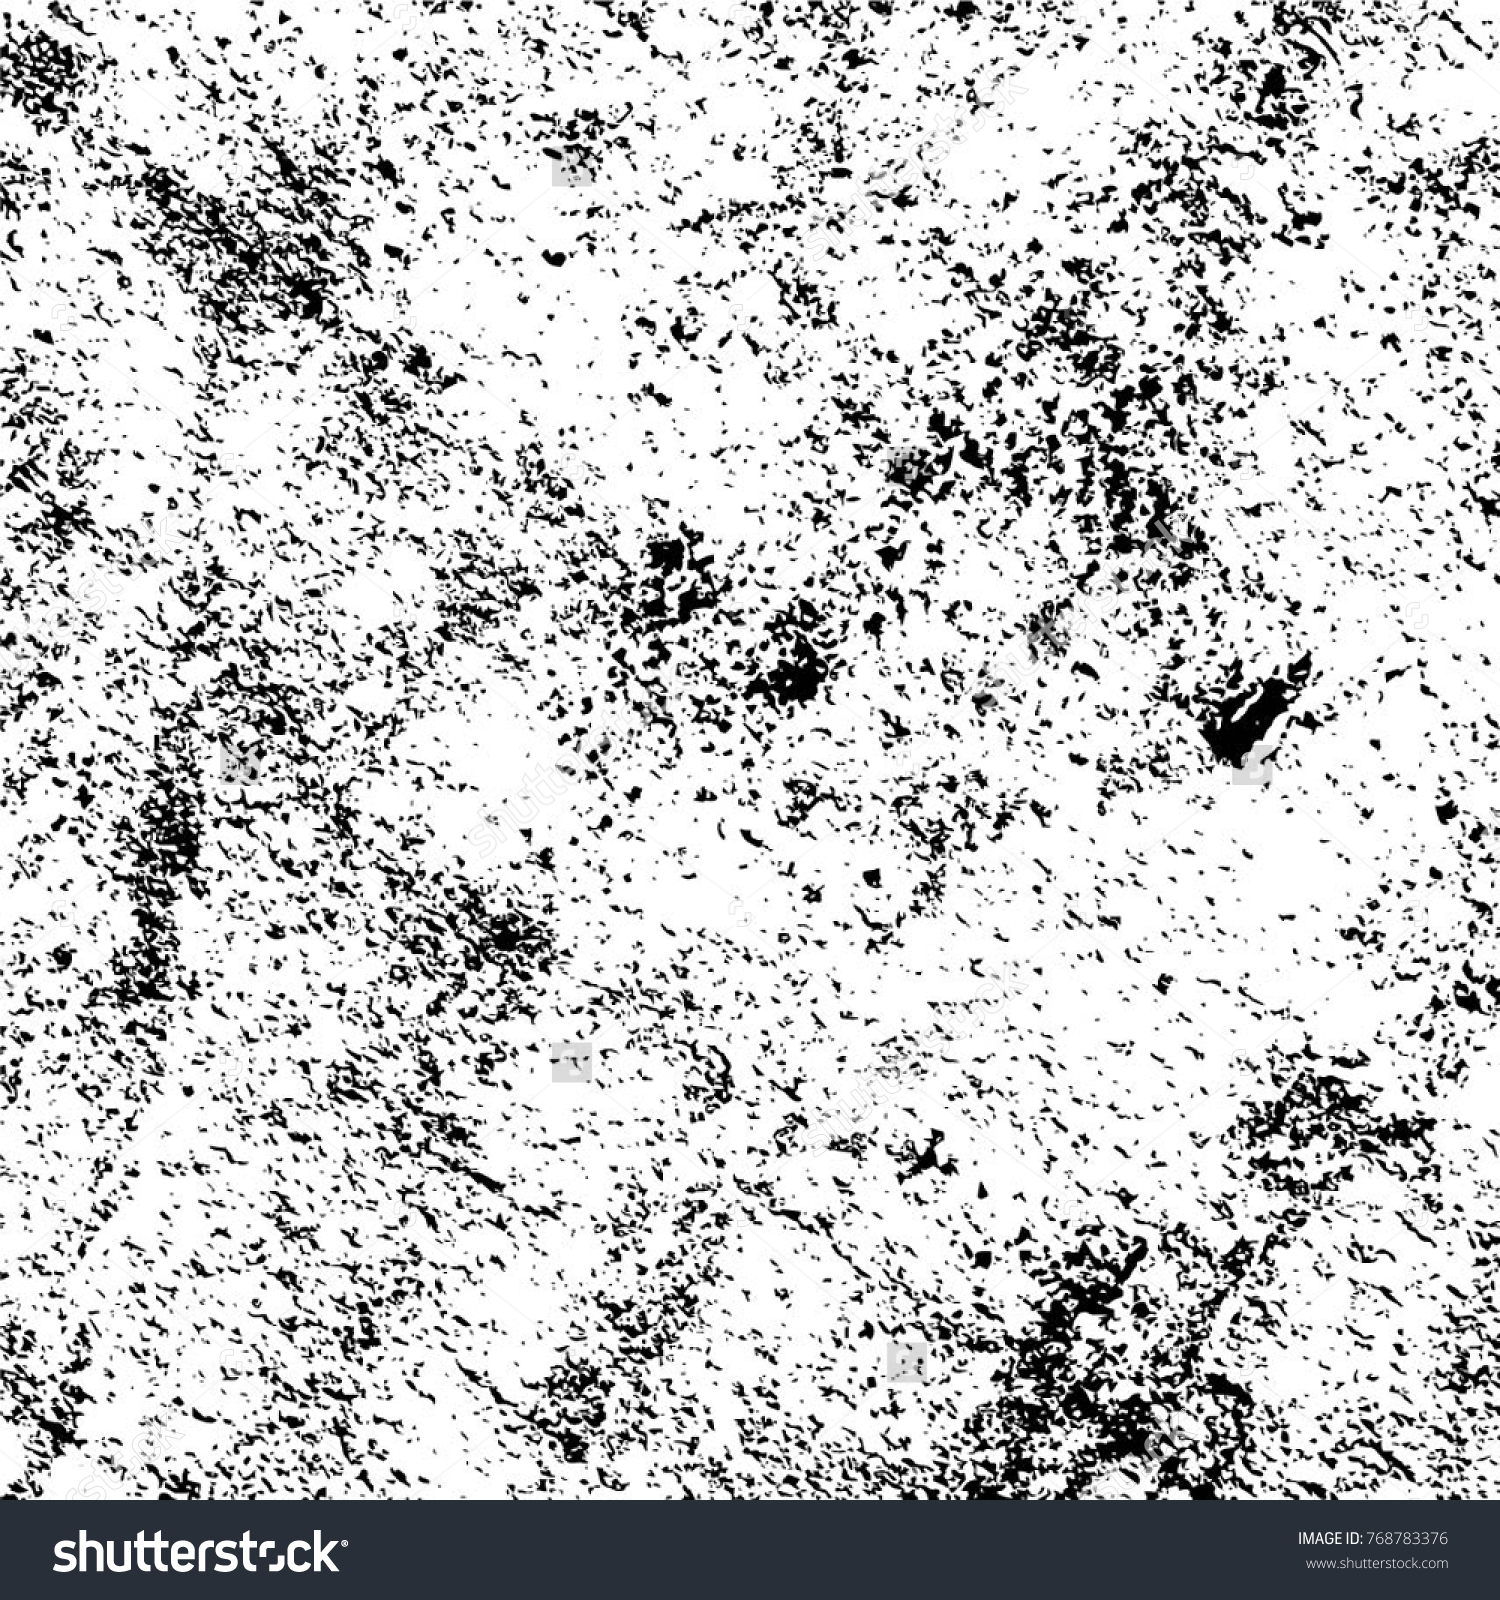 Blackwhite Old Grunge Overlay Particles Texture Stock Vector ...